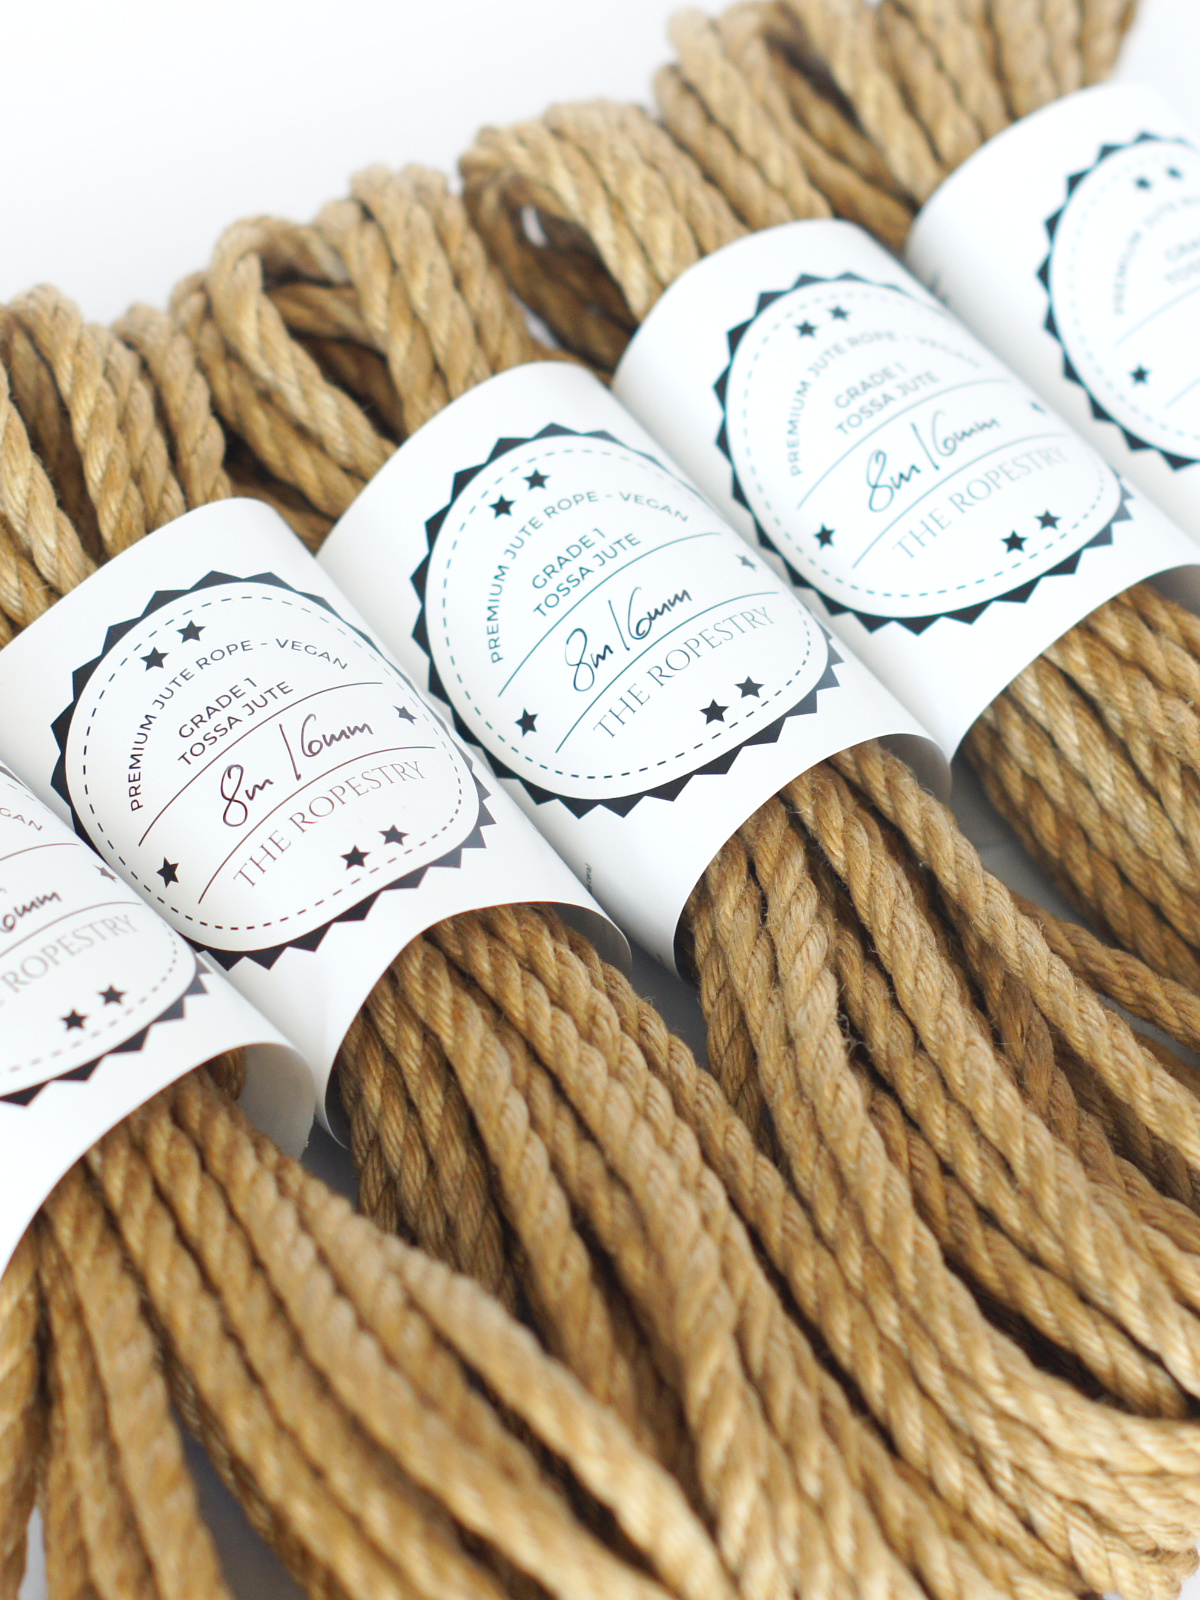 B-STOCK 5pc set, ∅ 6mm, 8m, jute rope, ready for use